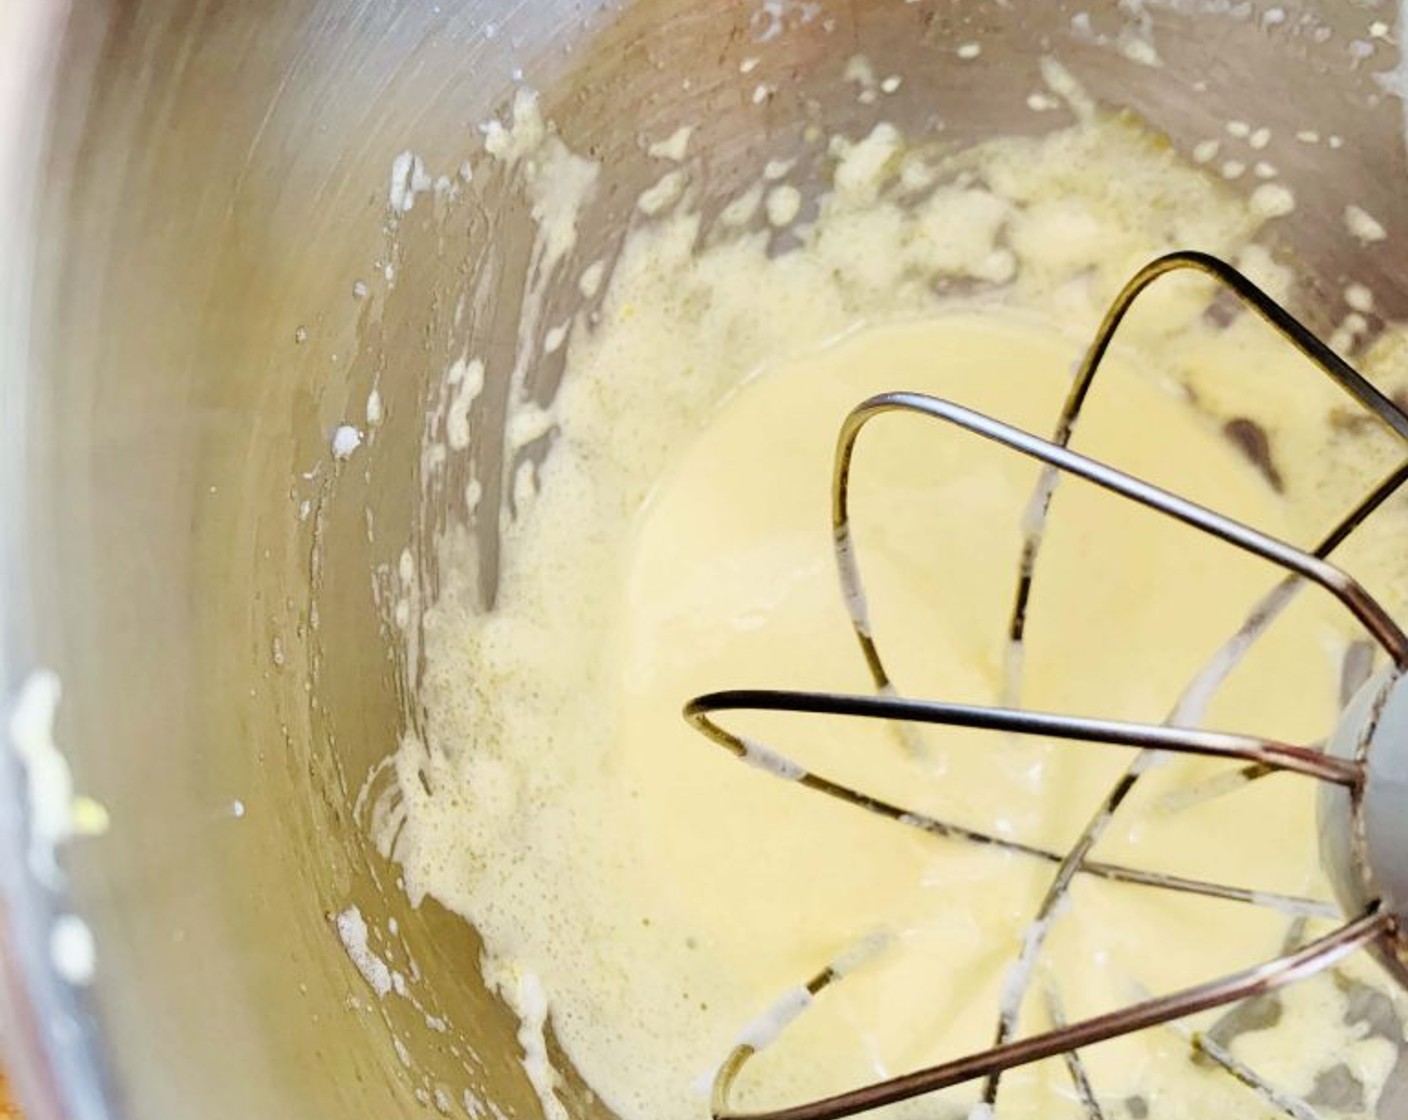 step 2 In a separate bowl whisk egg yolks, Granulated Sugar (1/3 cup), and Orgeat Almond Syrup (3 Tbsp) until light in color and foamy.